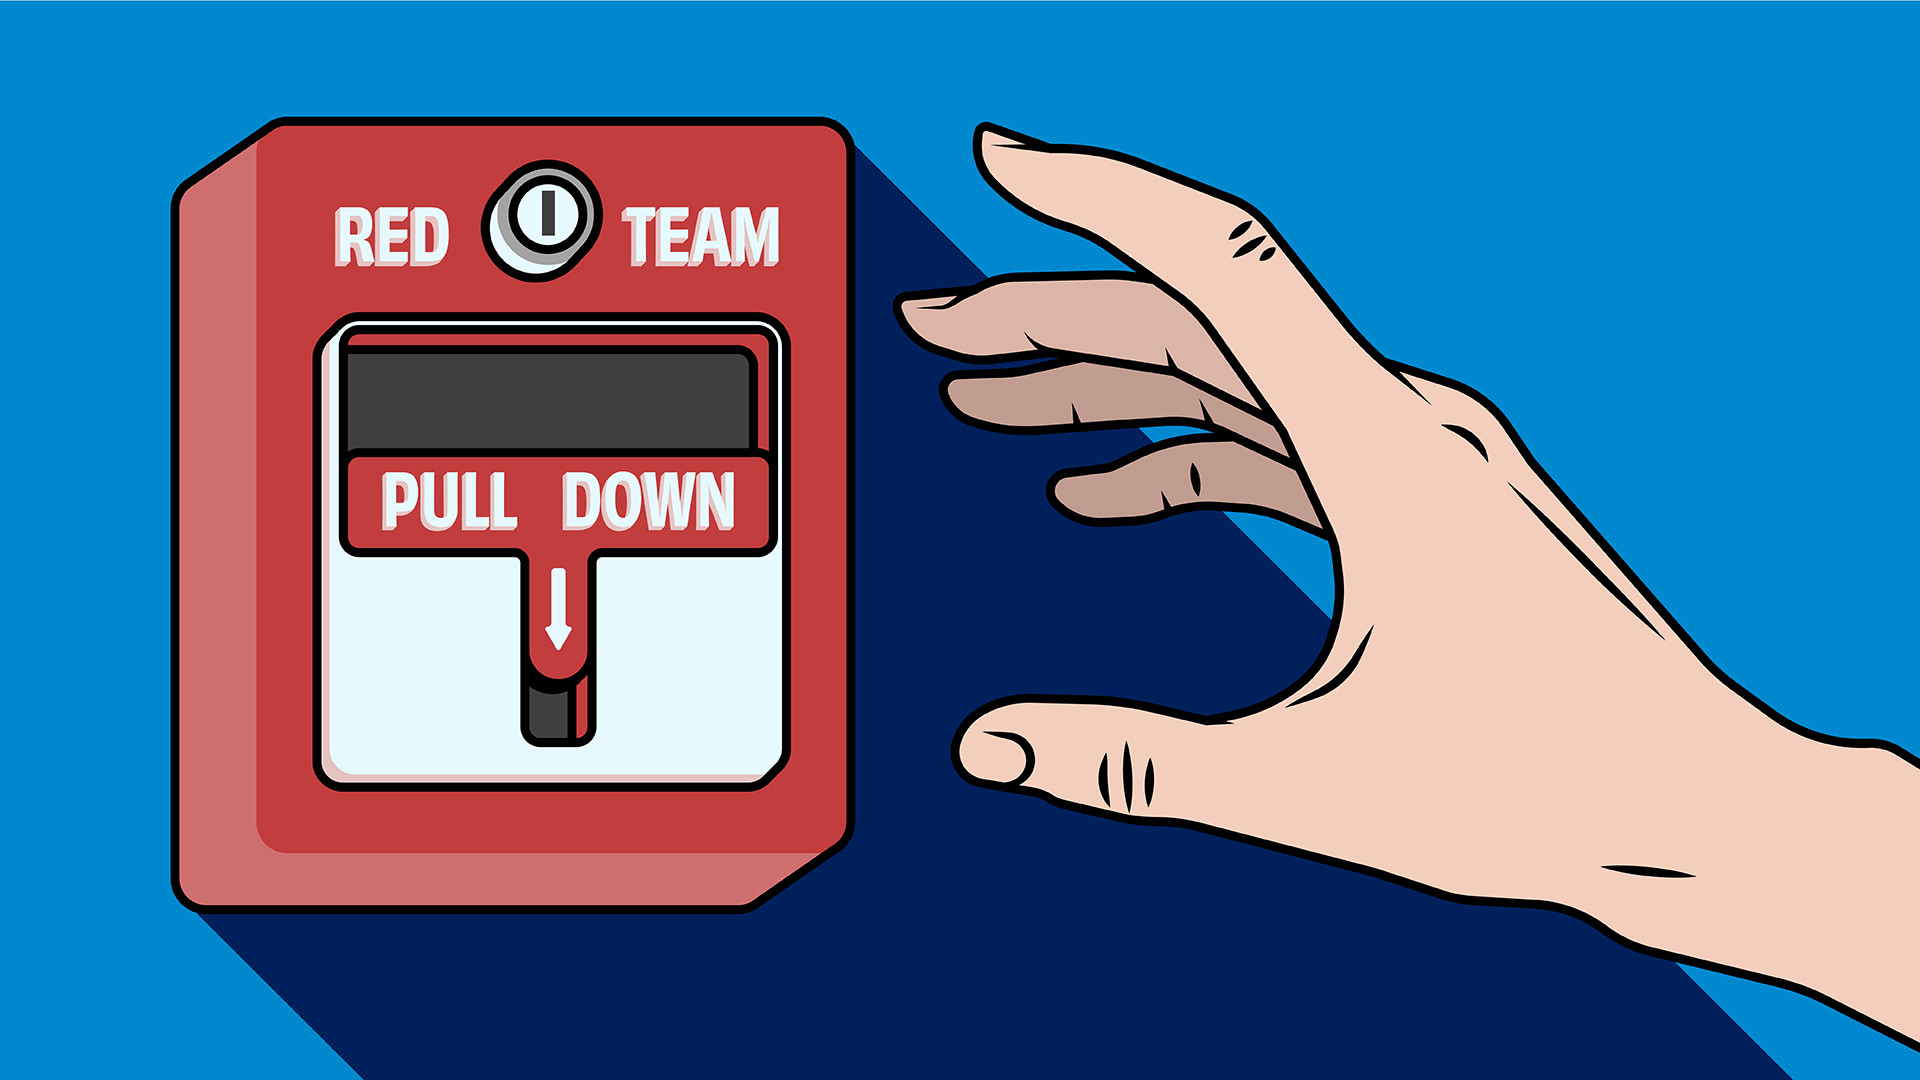 Red teaming is like a fire drill that tests your defenses